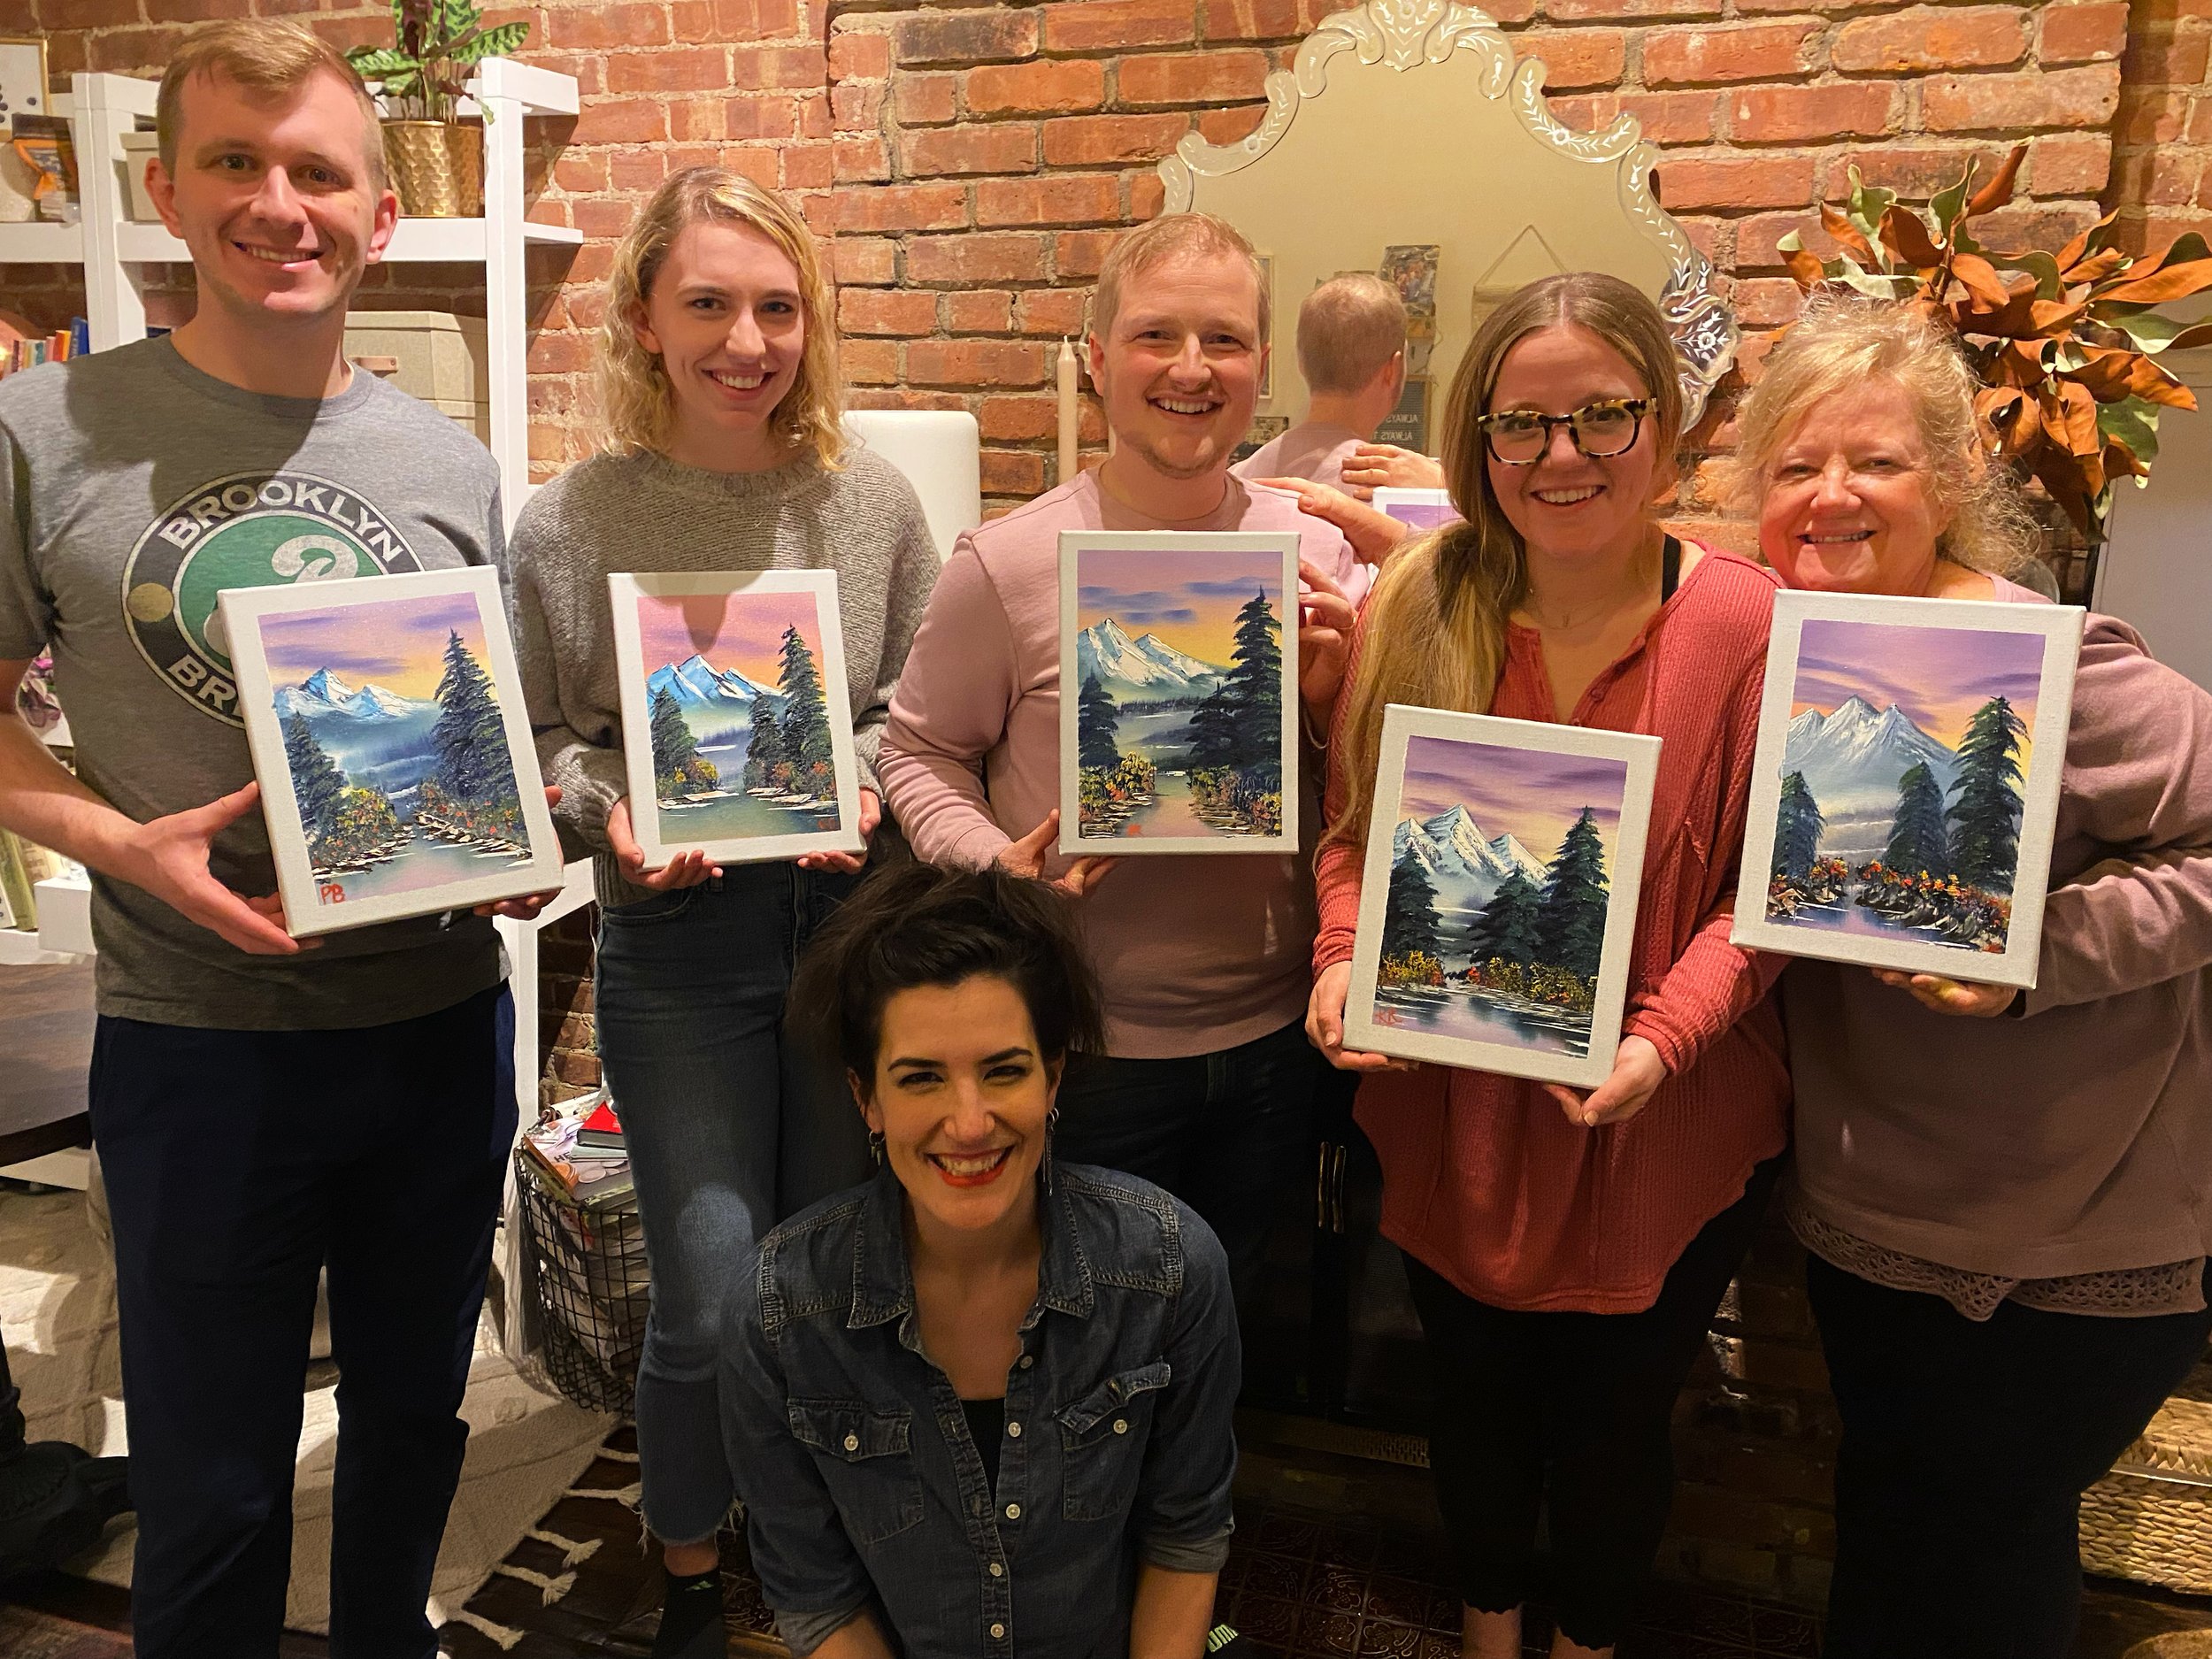 Happy little trees': Penn Township woman to teach joy of Bob Ross painting  at workshop